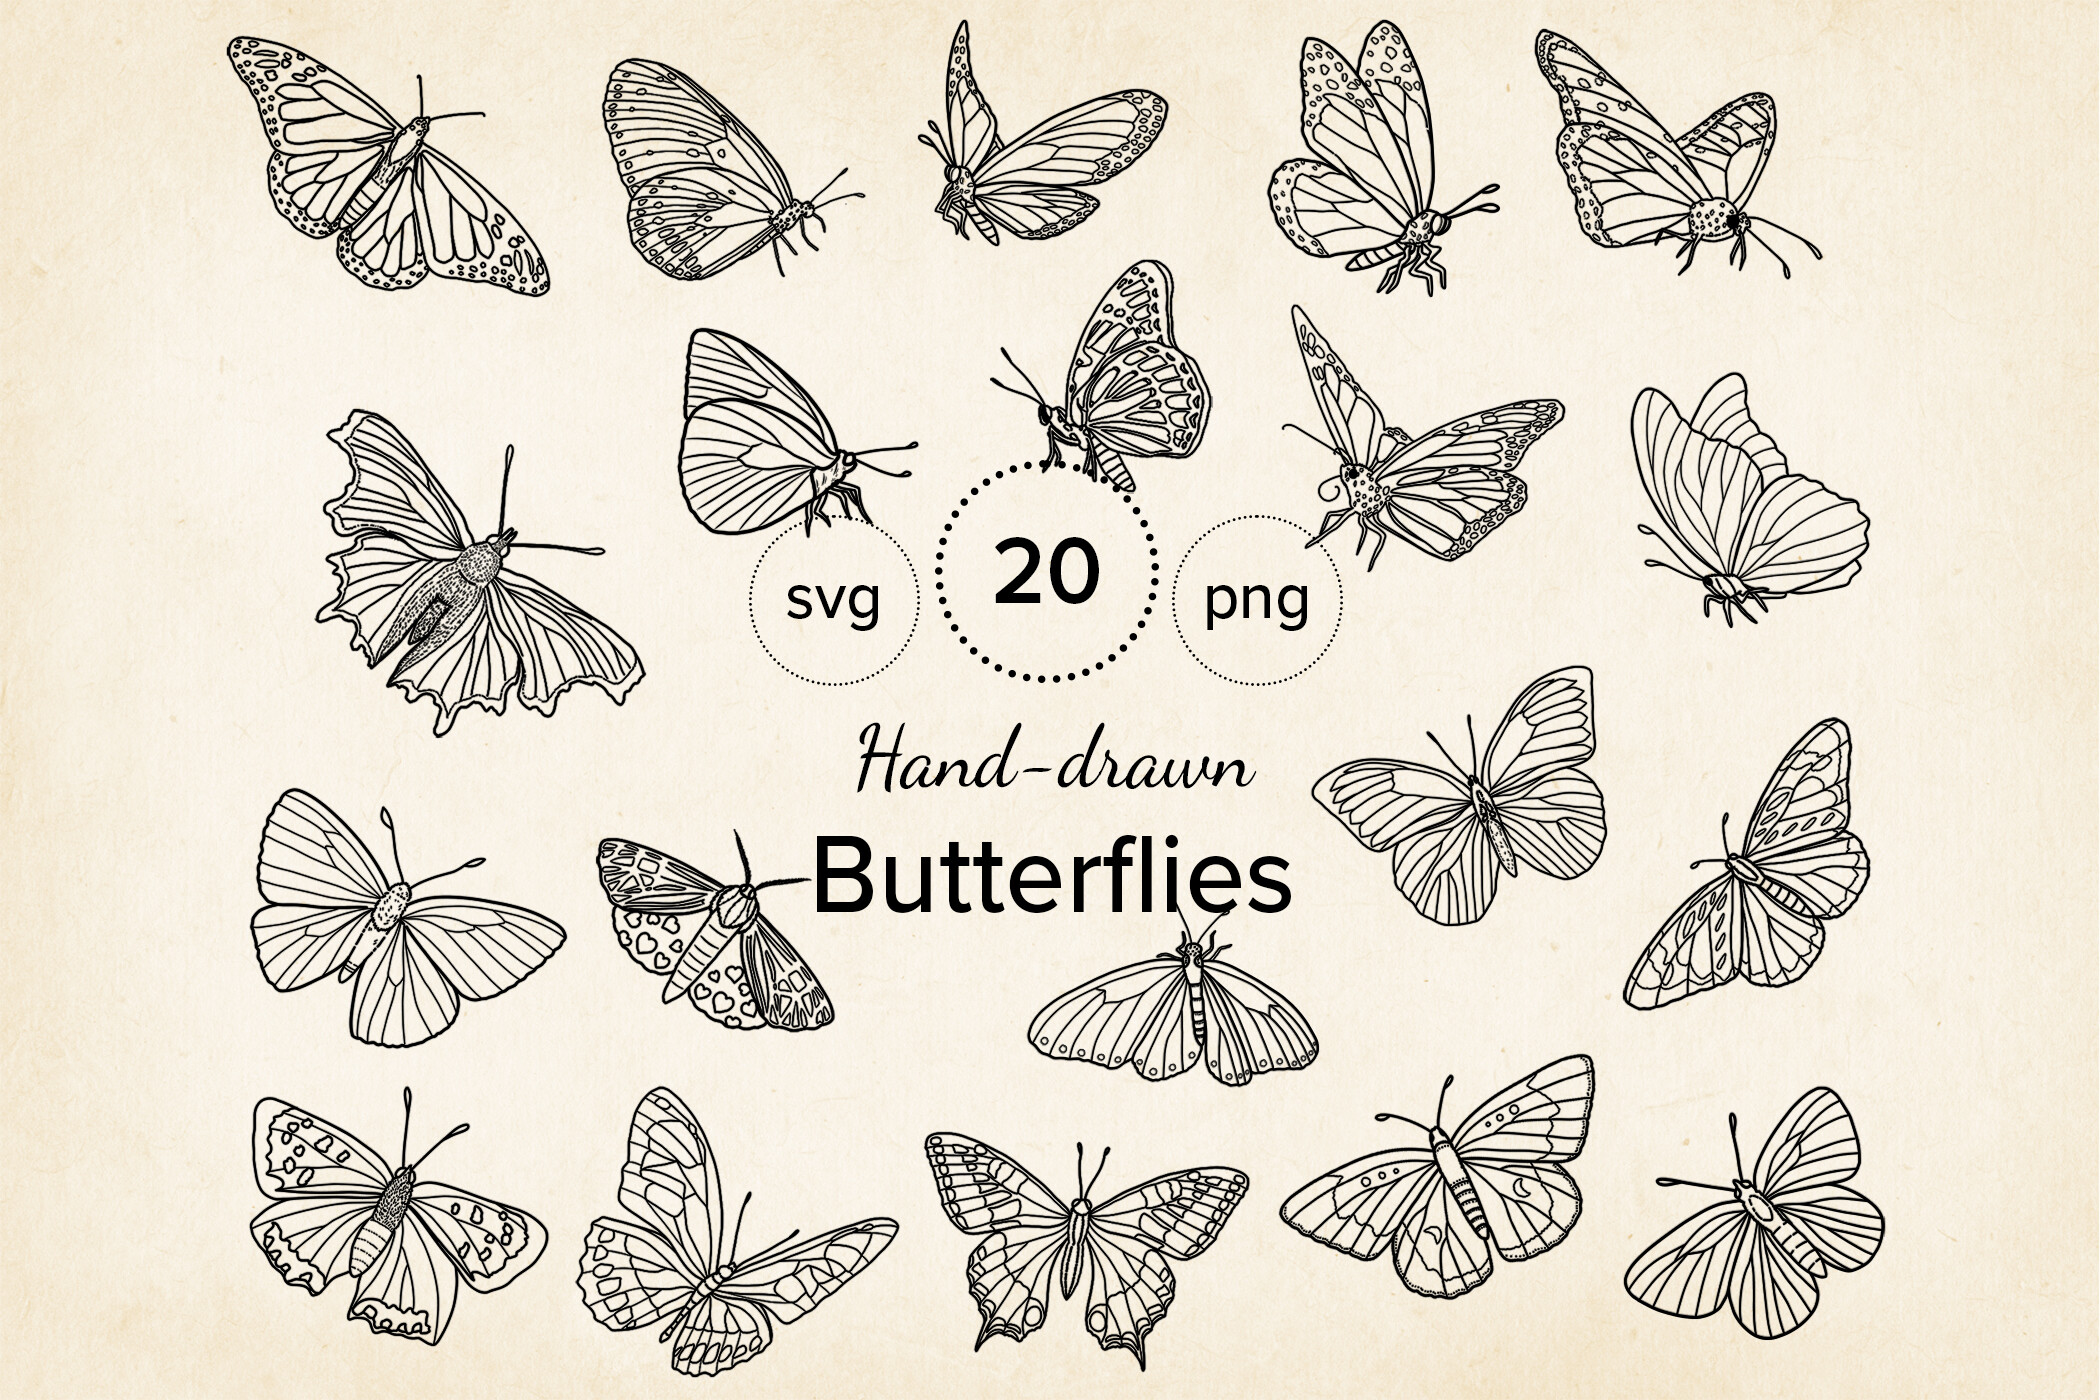 Butterfly SVG & PNG Line Art Bundle Graphic by Paper Art Garden ...